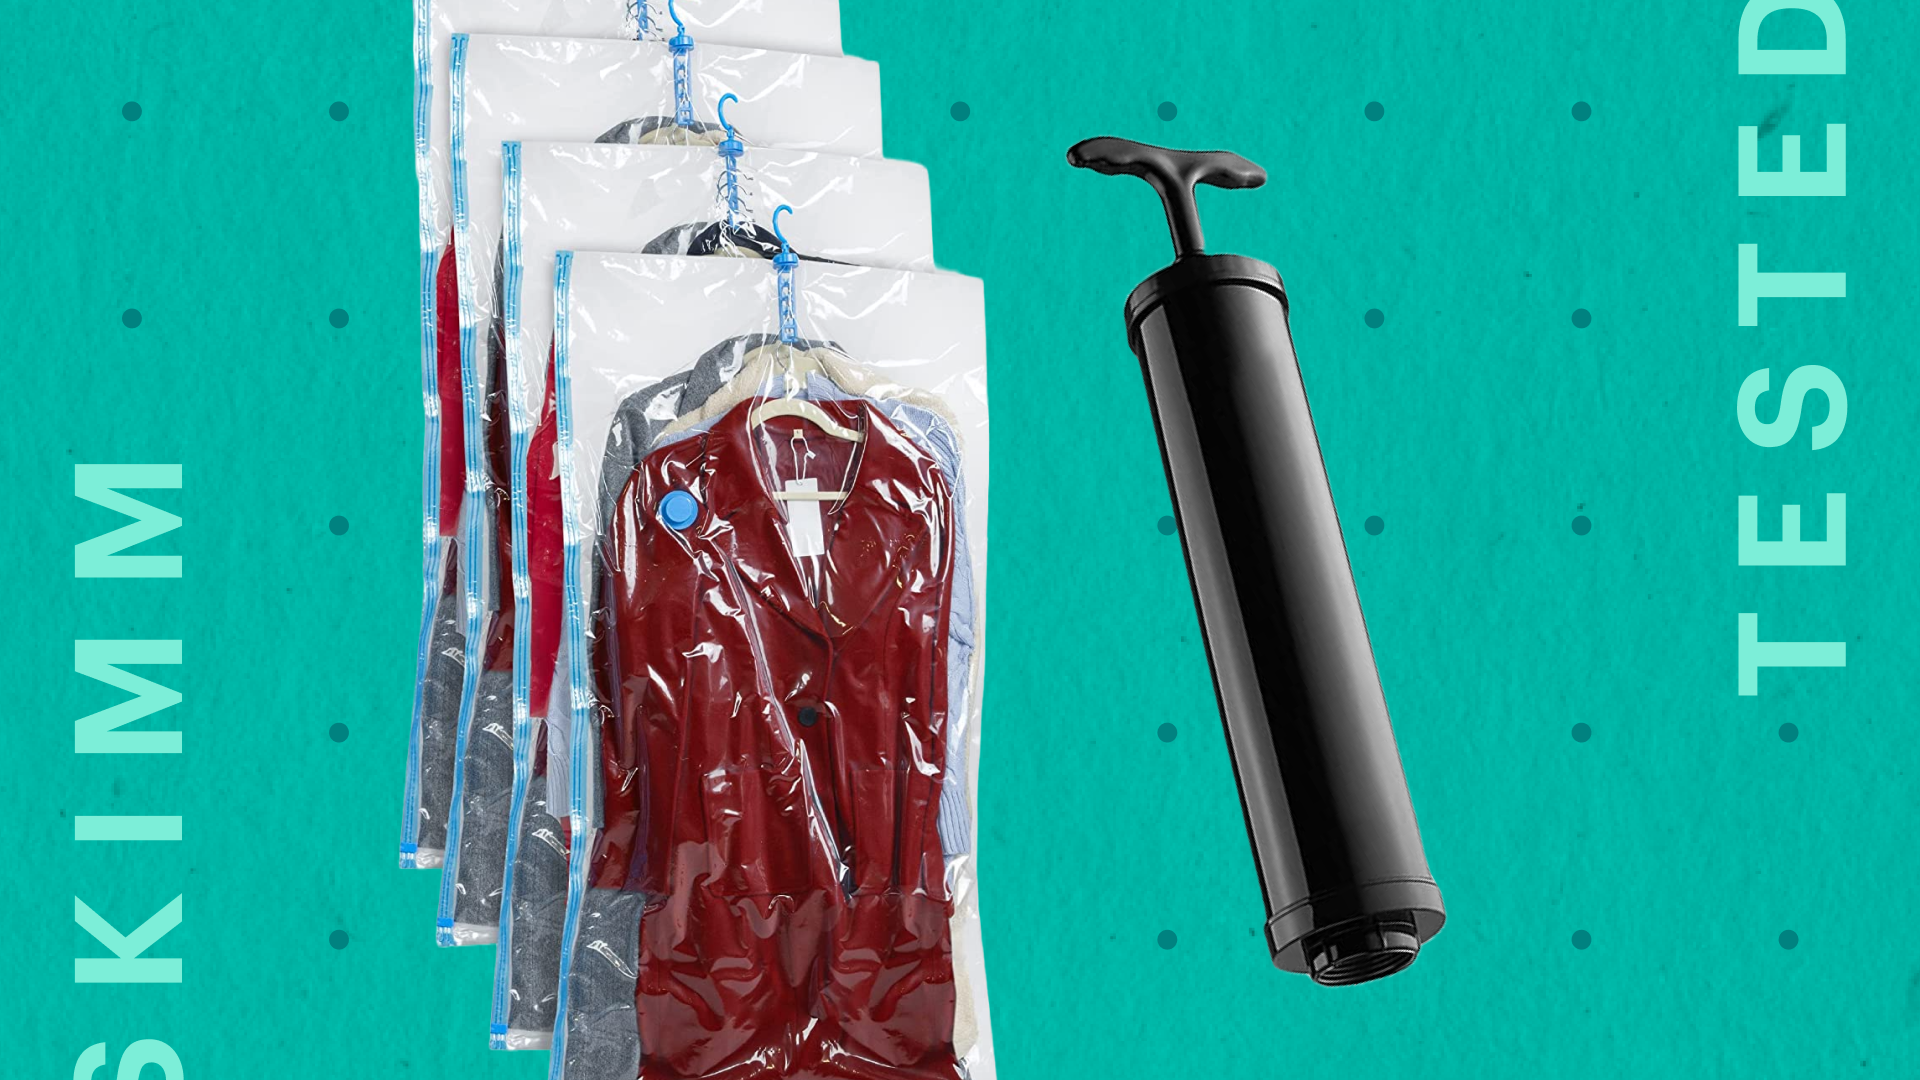 Our Review of the Spacesaver Vacuum-Seal Bags for Clothes